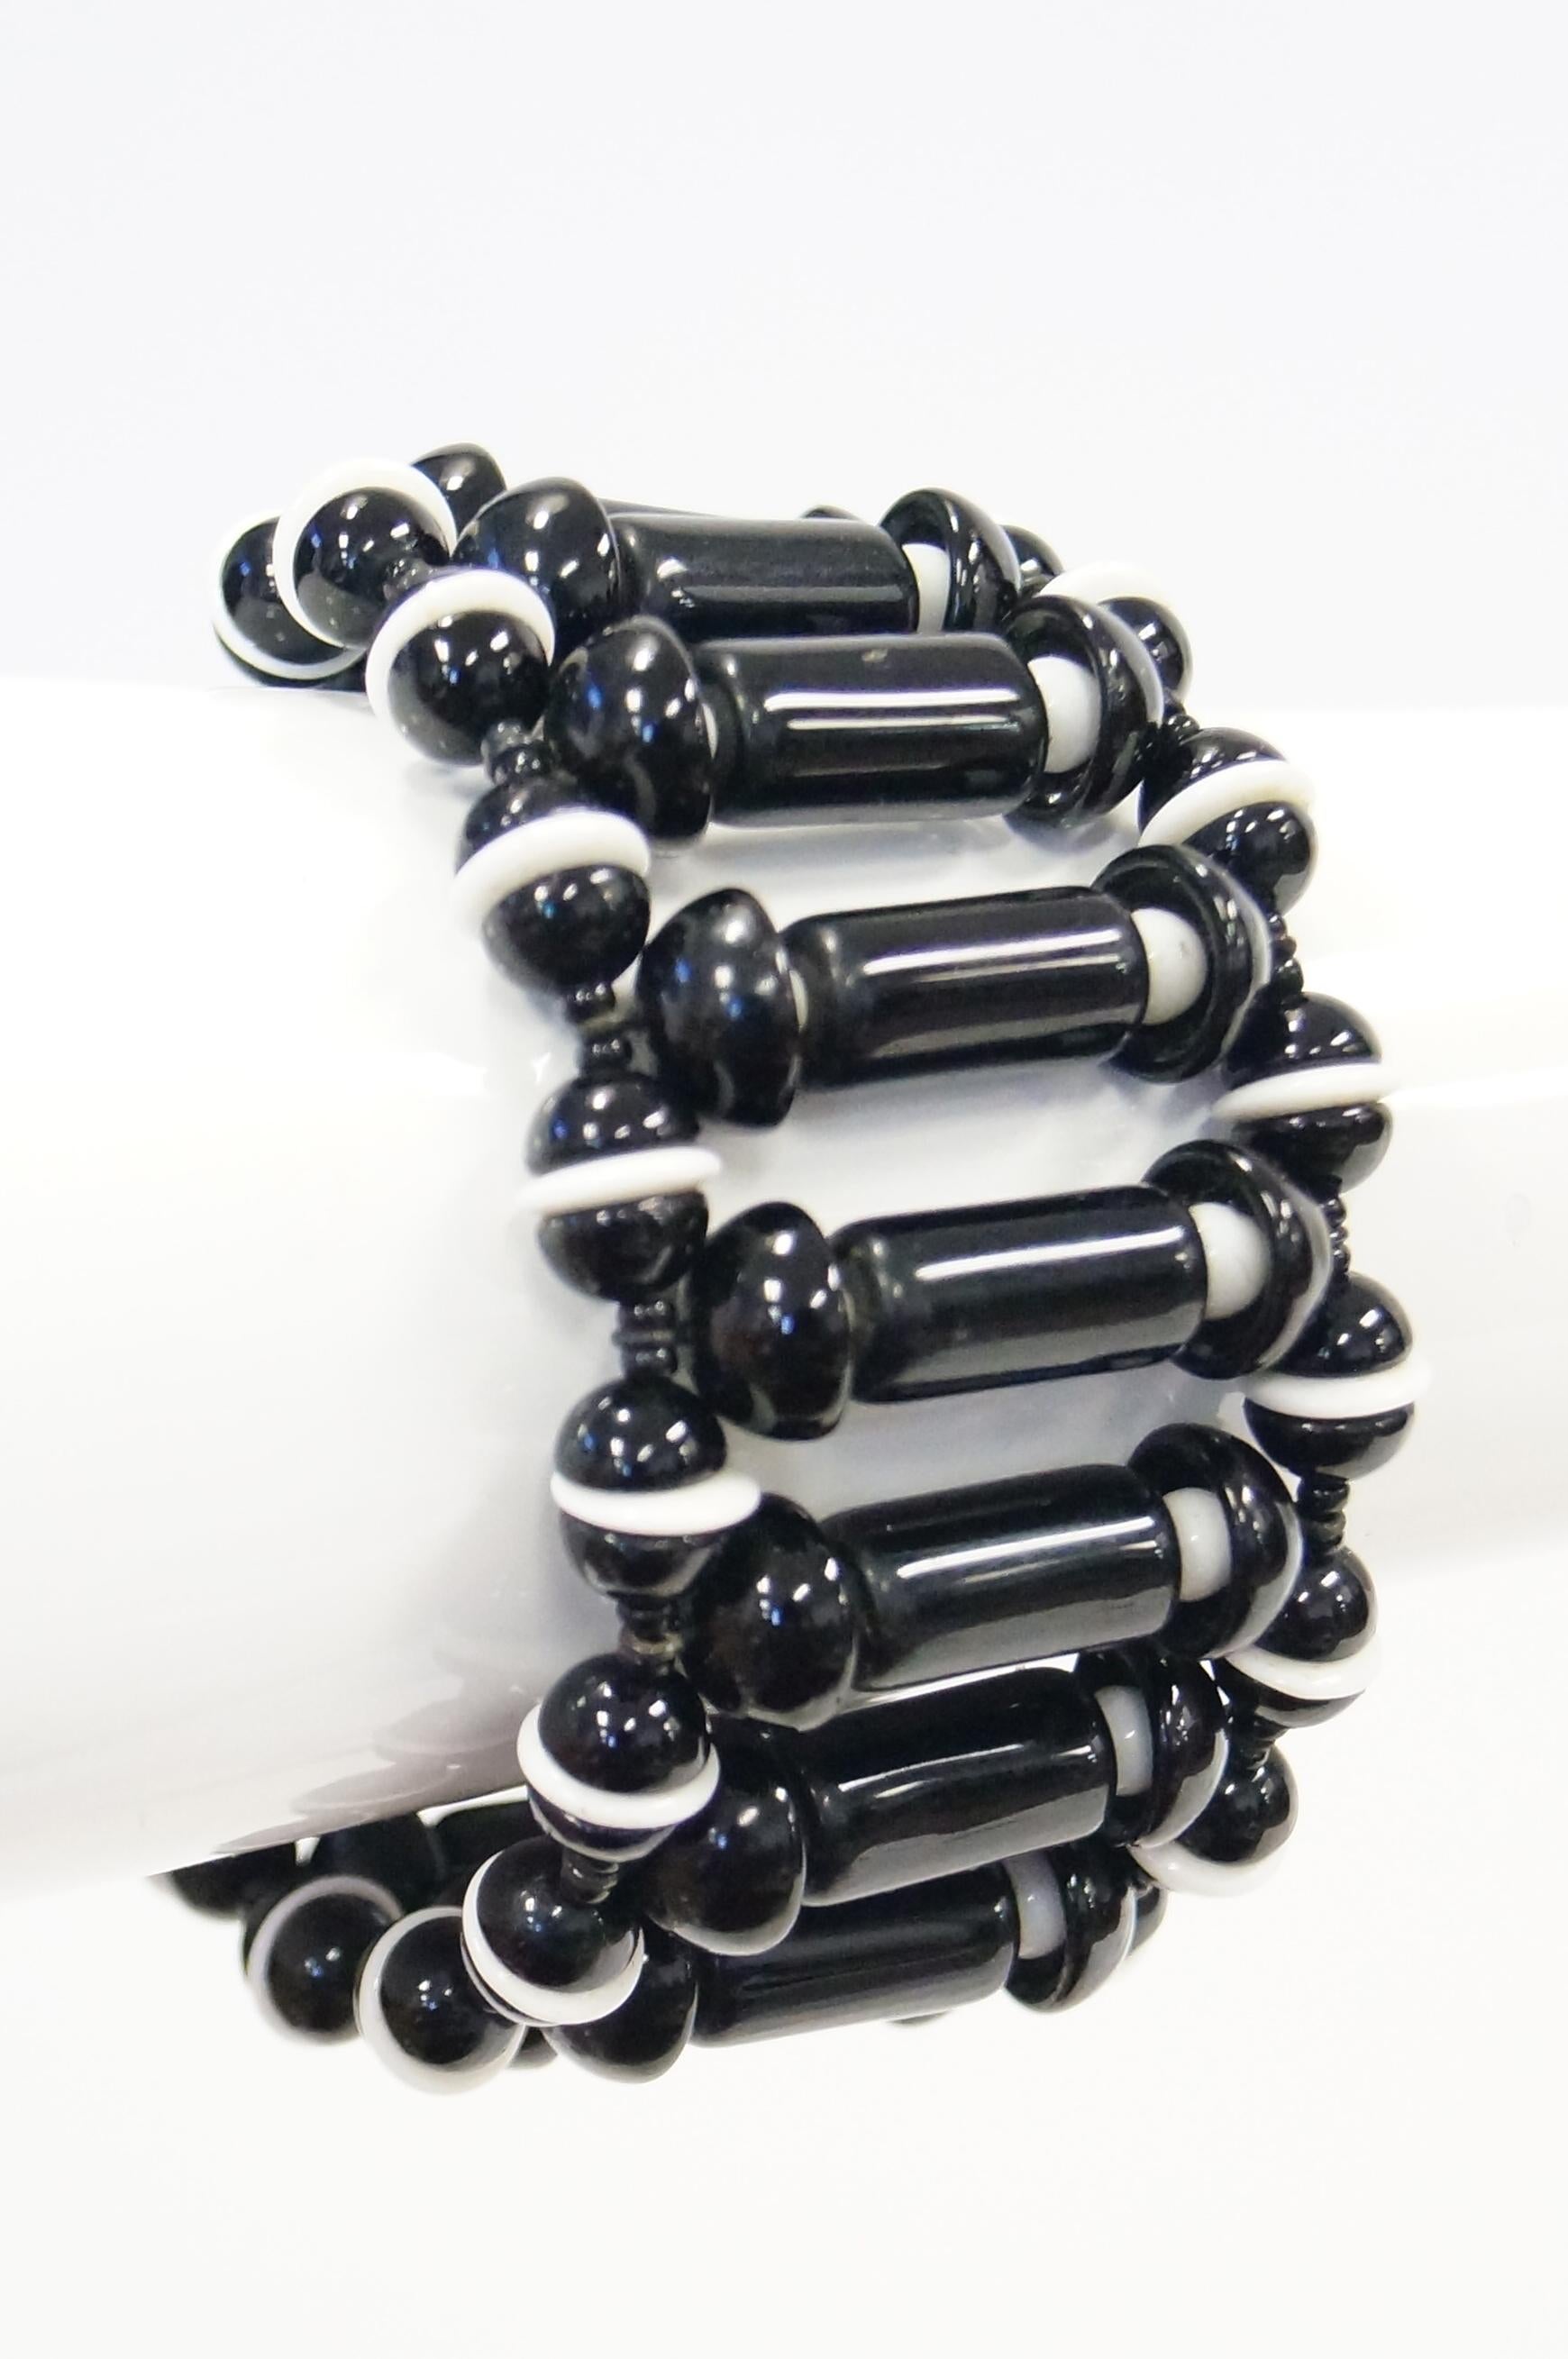 Mod Black and white glass cuff bracelet with safety chain. Tubular and mushroom cap beads come together creating a stylish piece of arm art. This large statement cuff  is all you need to compliment your look day or evening. The scale of the cuff is